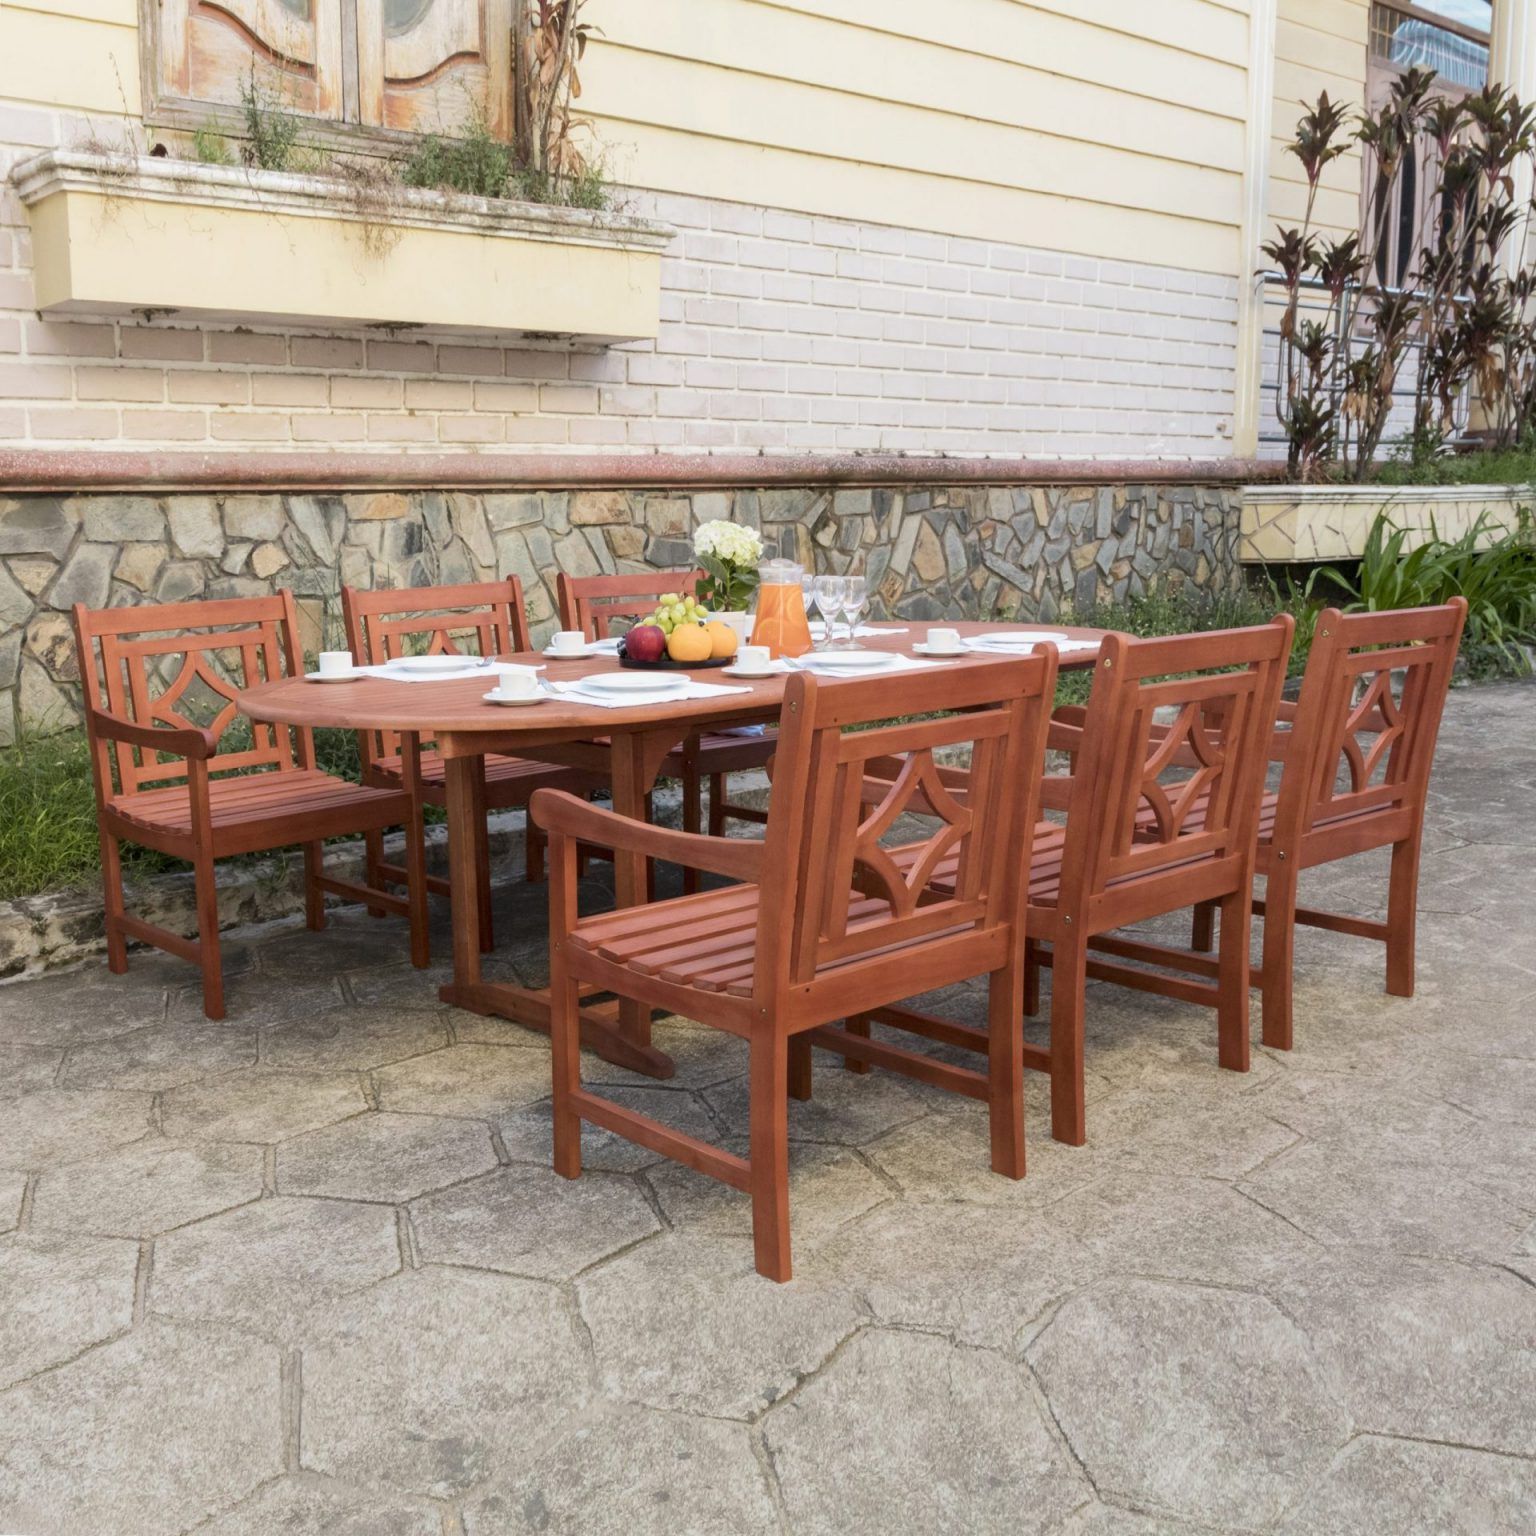 Extendable 7 Piece Patio Dining Sets Intended For Fashionable Malibu 7 Piece Wood Extendable Table Dining Set – All Outdoor Decor (View 4 of 15)